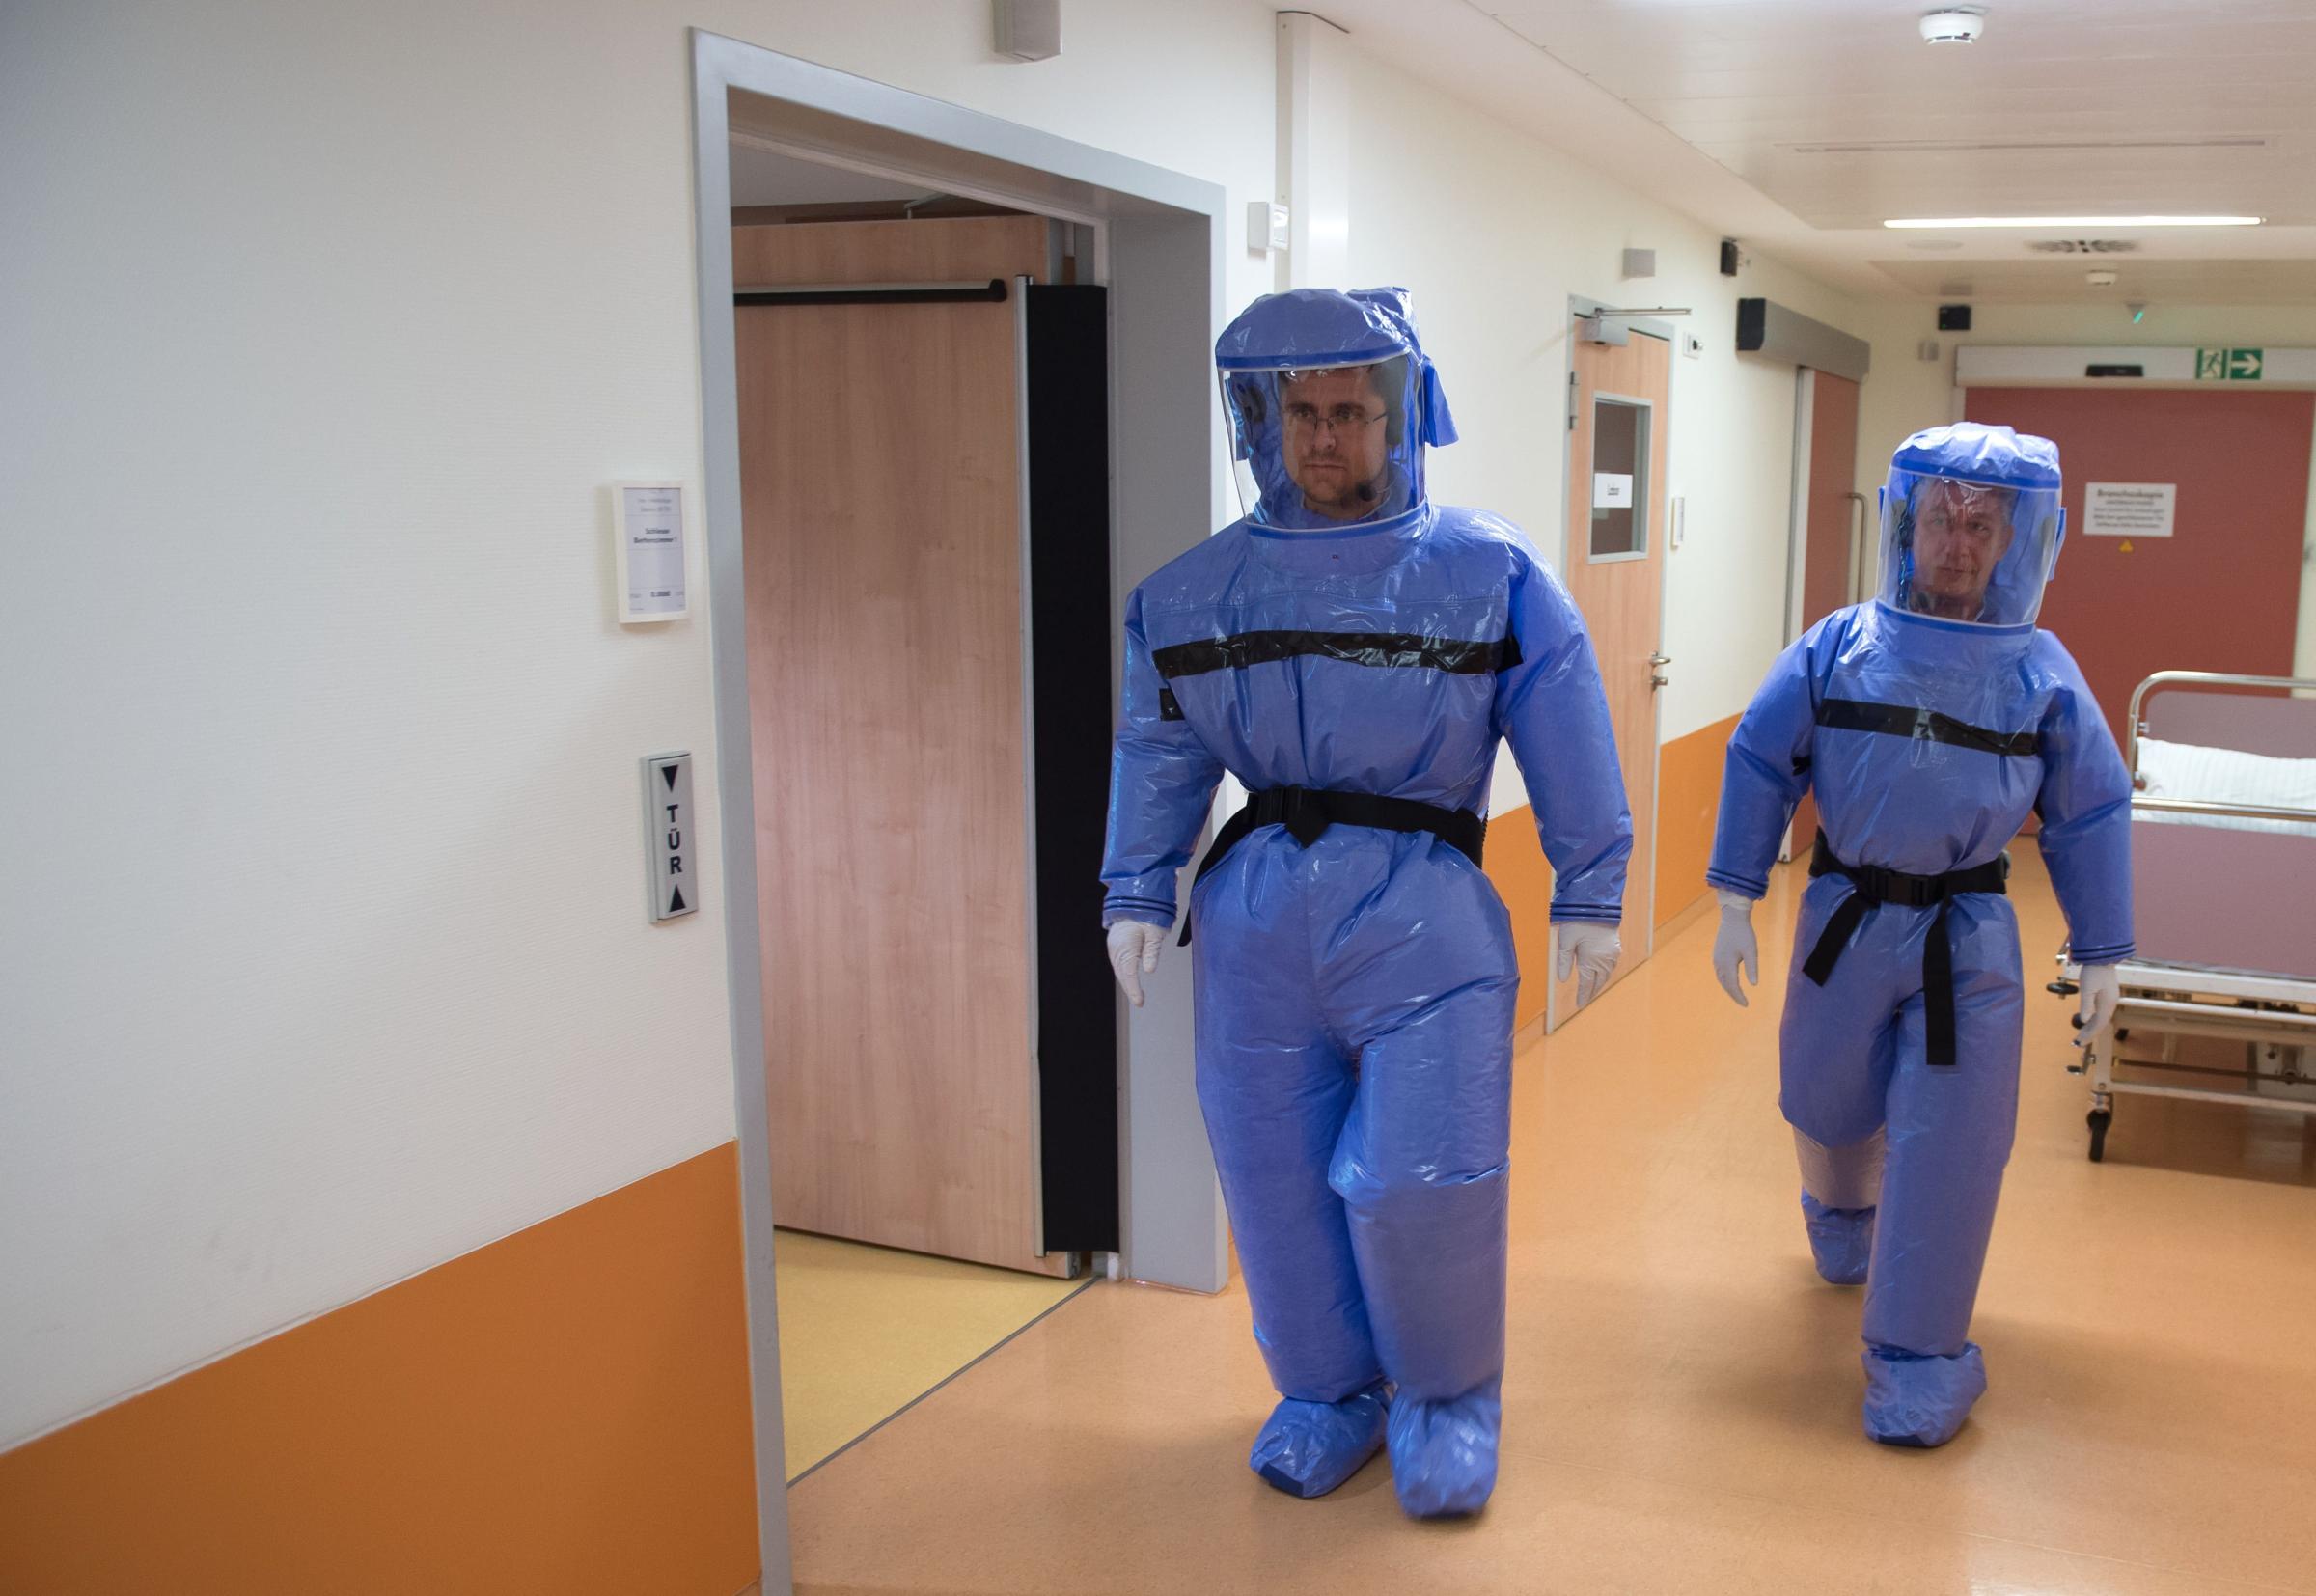 Infectious disease specialist Florian Steiner and quarantine office leader Thomas Klotzkowski wear protective clothing as they demonstrate the proceedings at the ward of Berlin's Charite hospital on August 11, 2014.